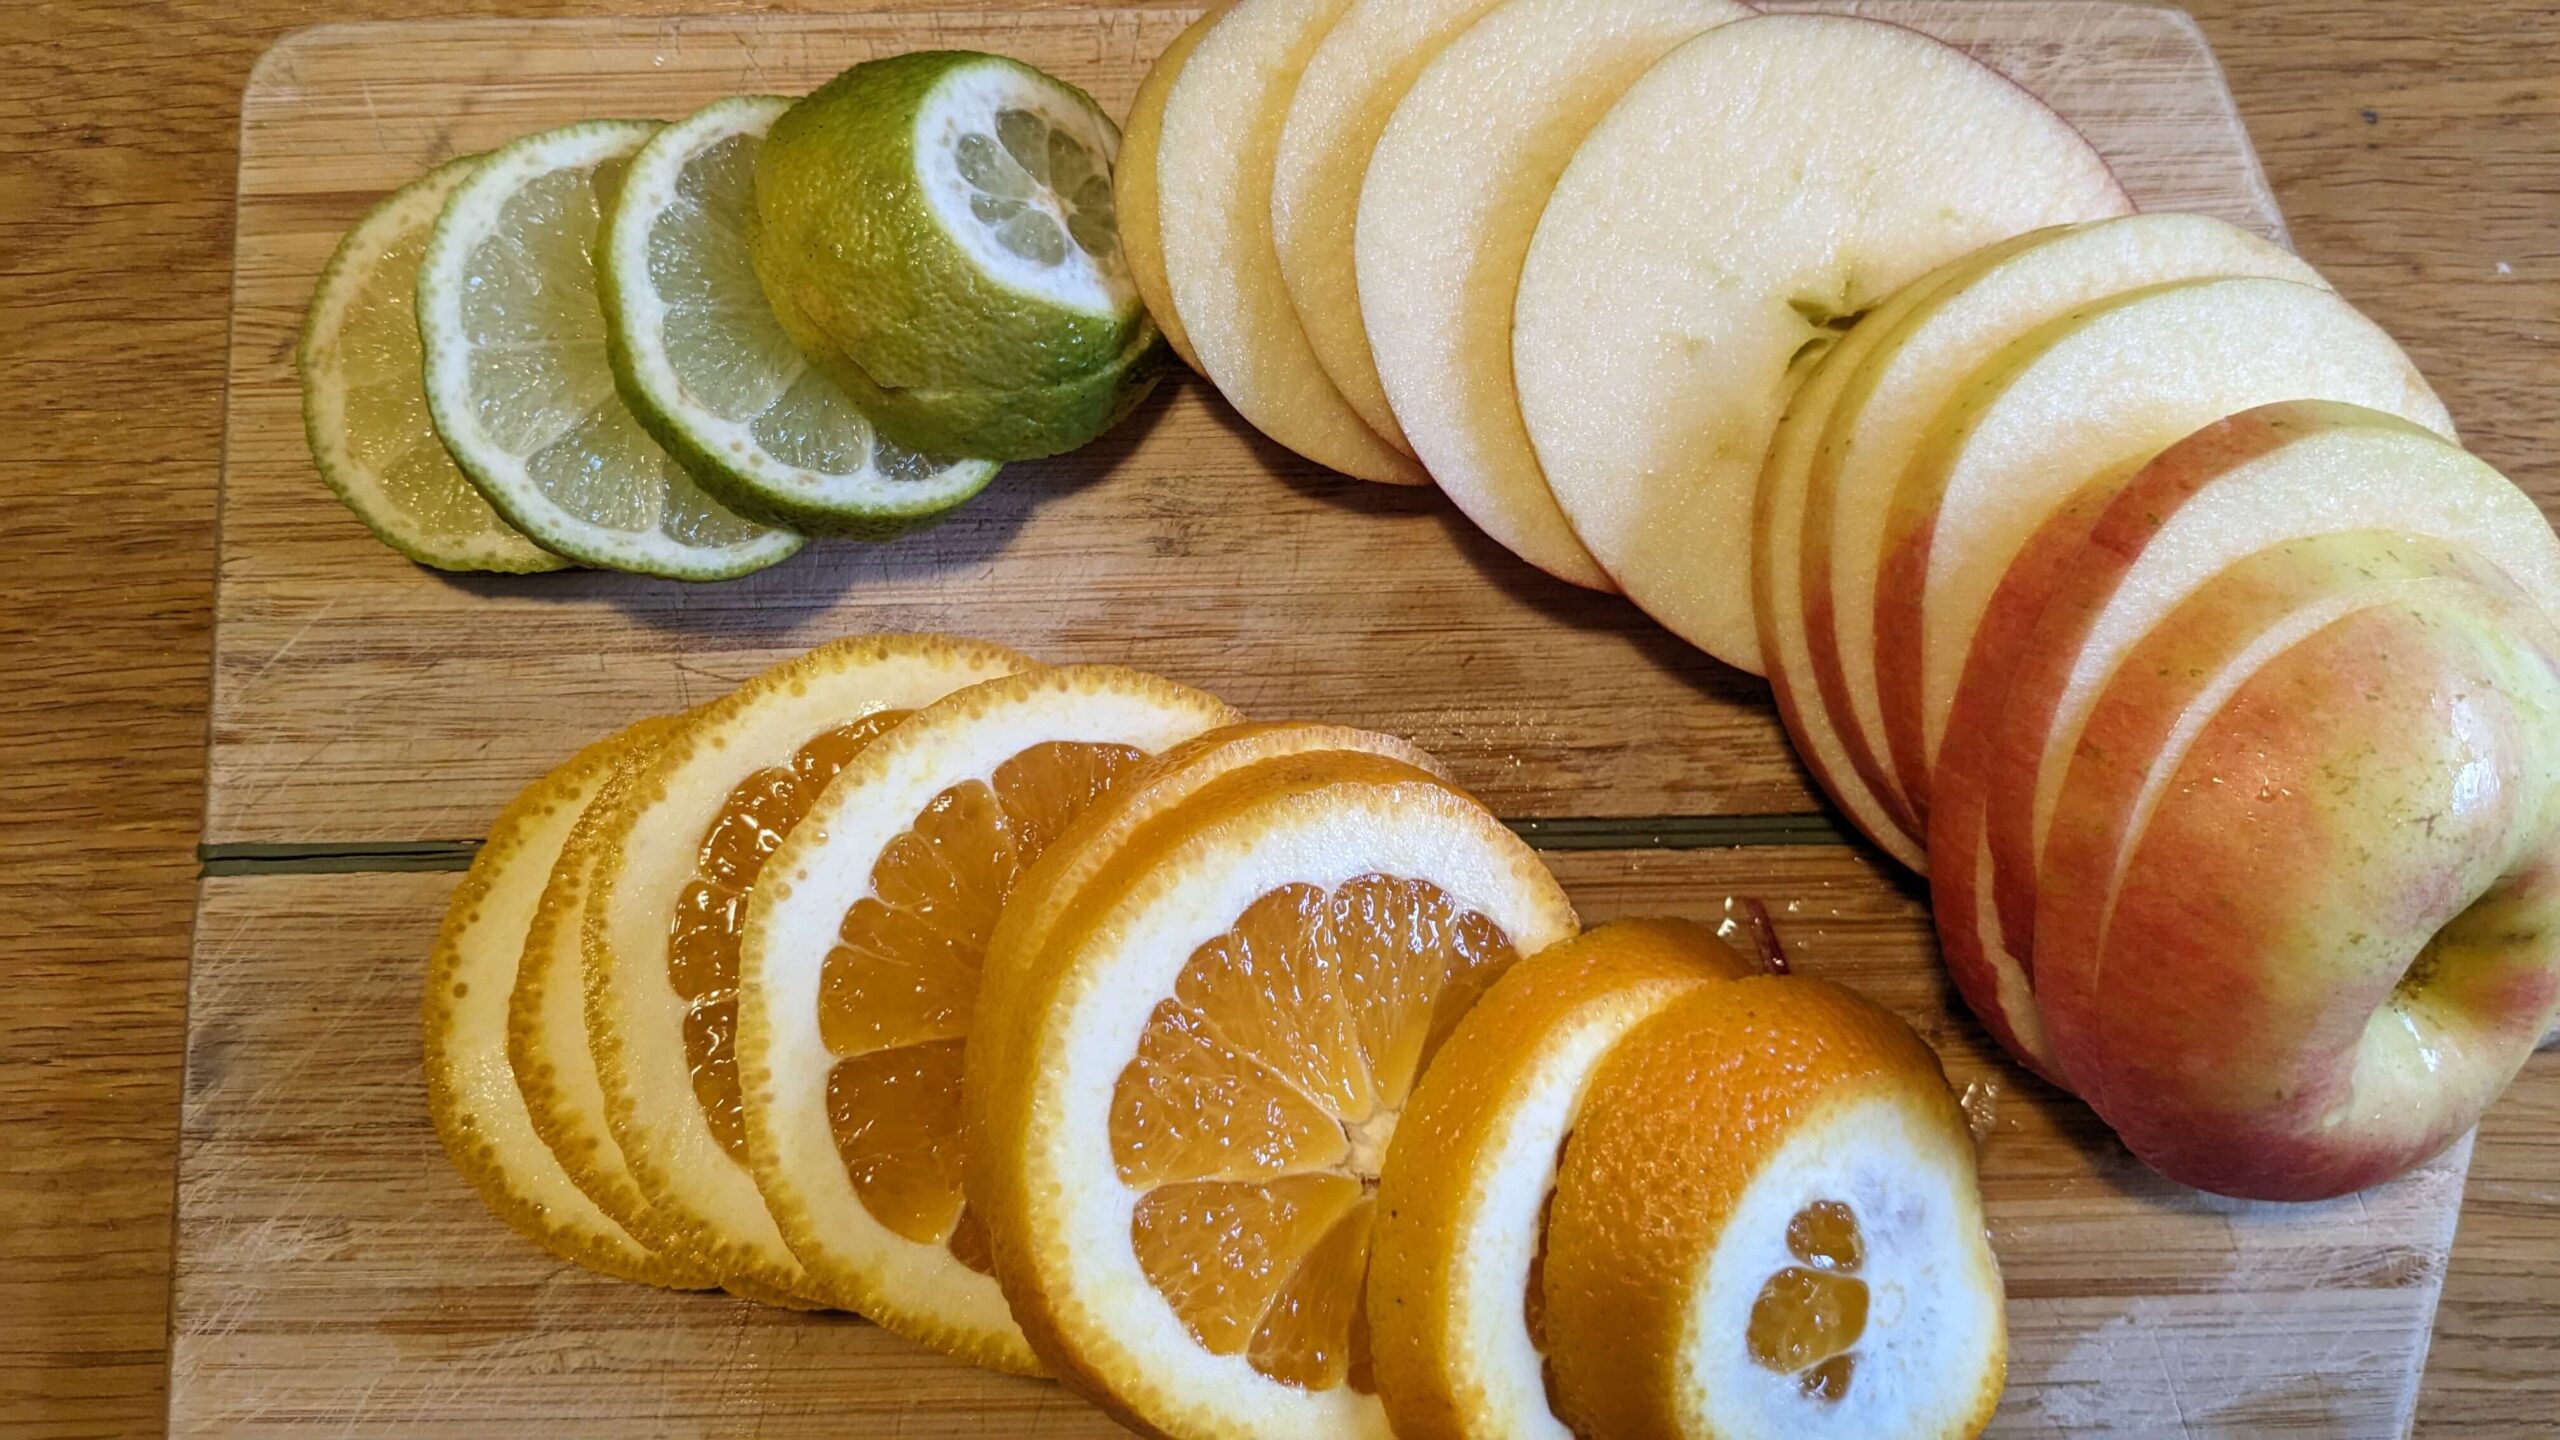 sliced lime, orange, and apple on a cutting board